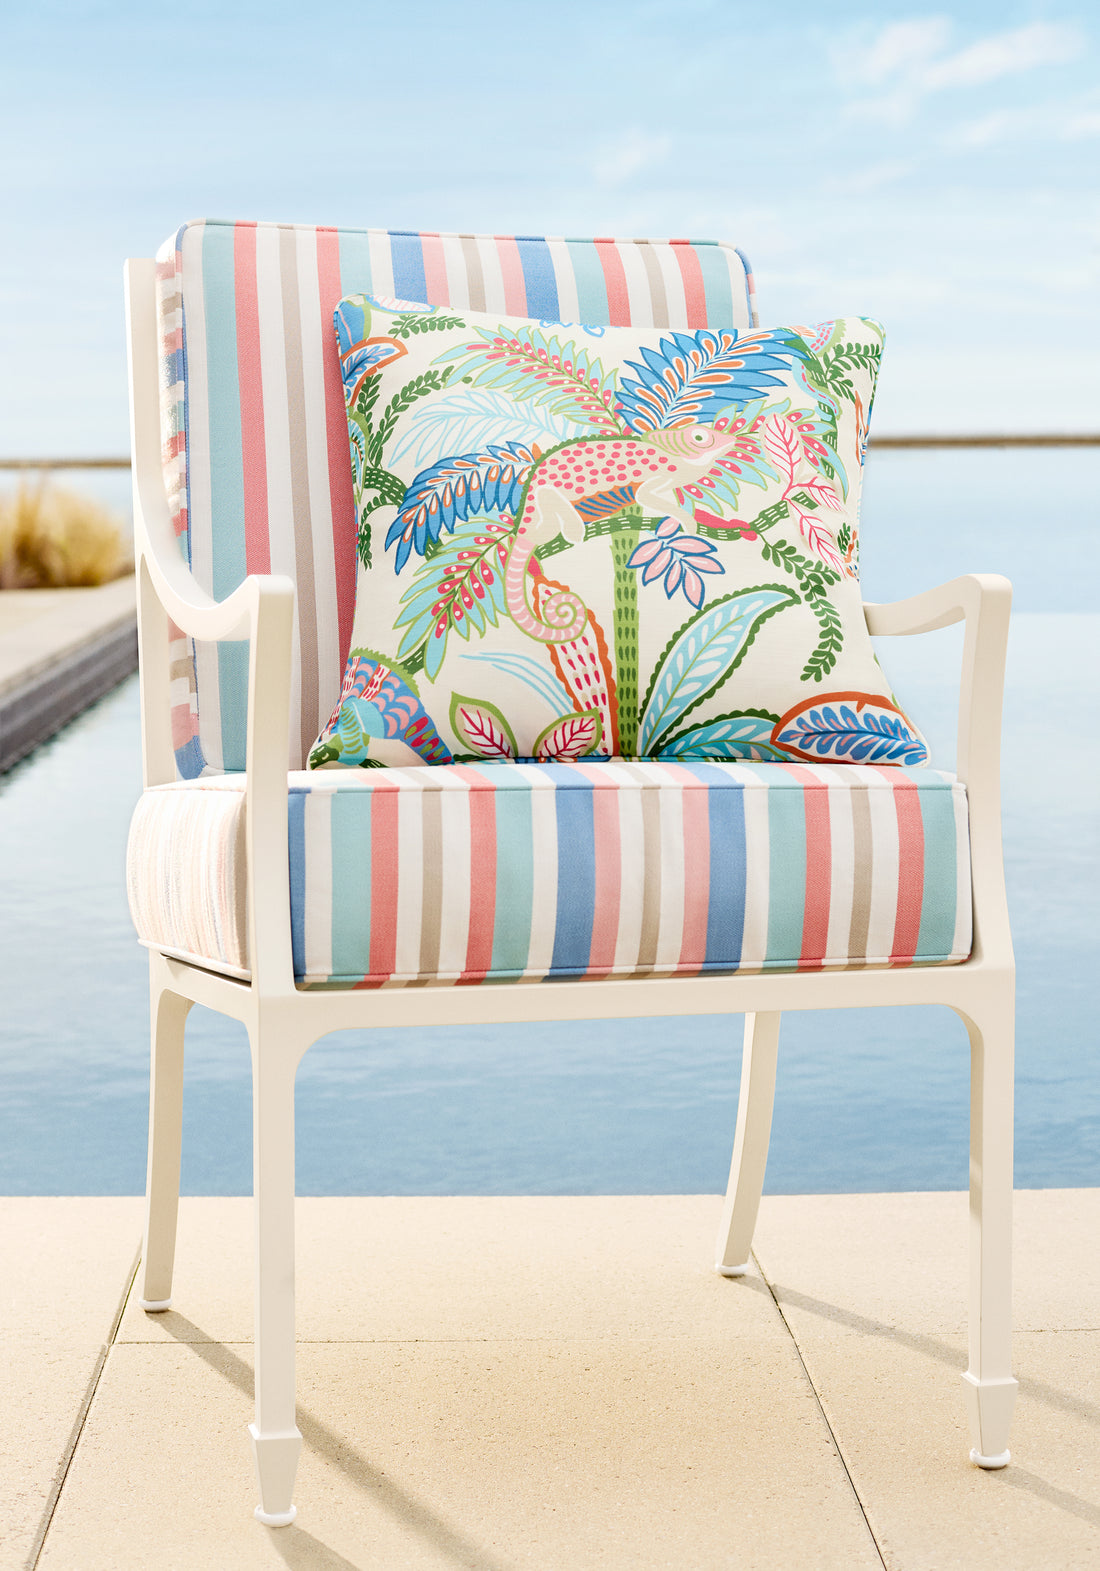 Pillow in Iggy fabric in island color - pattern number F81672 - by Thibaut in the Locale collection. Also pictured - Beaufort Dining Arm Chair from Mckinnon and Harris in Kalea Stripe woven fabric in Island color.